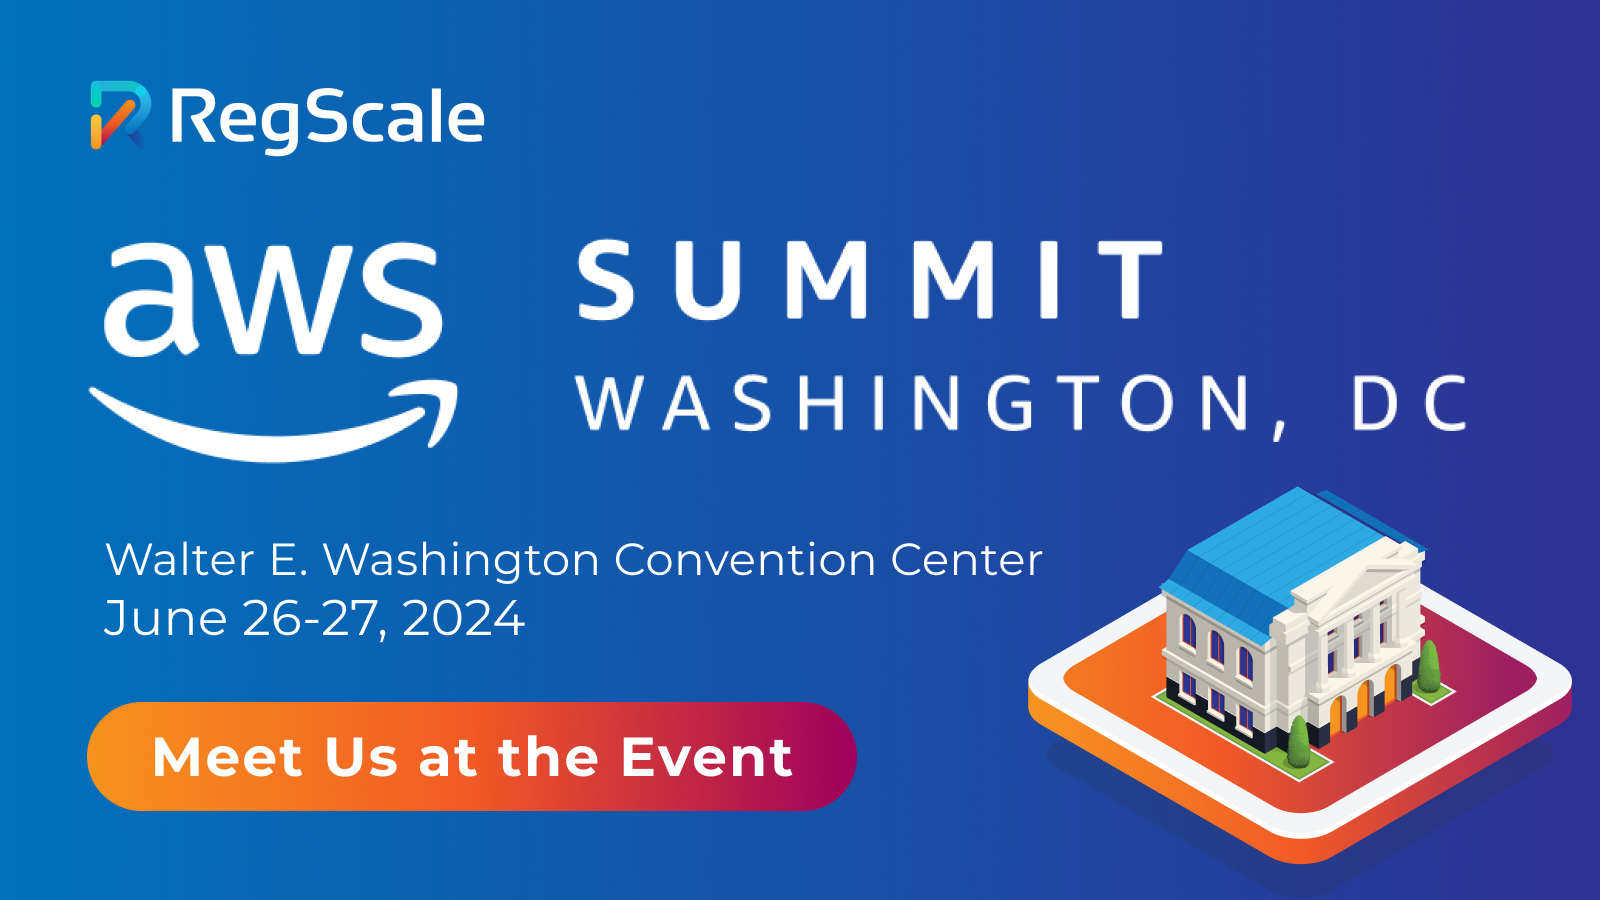 RegScale logo and AWS Summit Washington, DC logo. June 26-27, 2024 at Walter E. Washington Convention Center. Meet us at the event button.